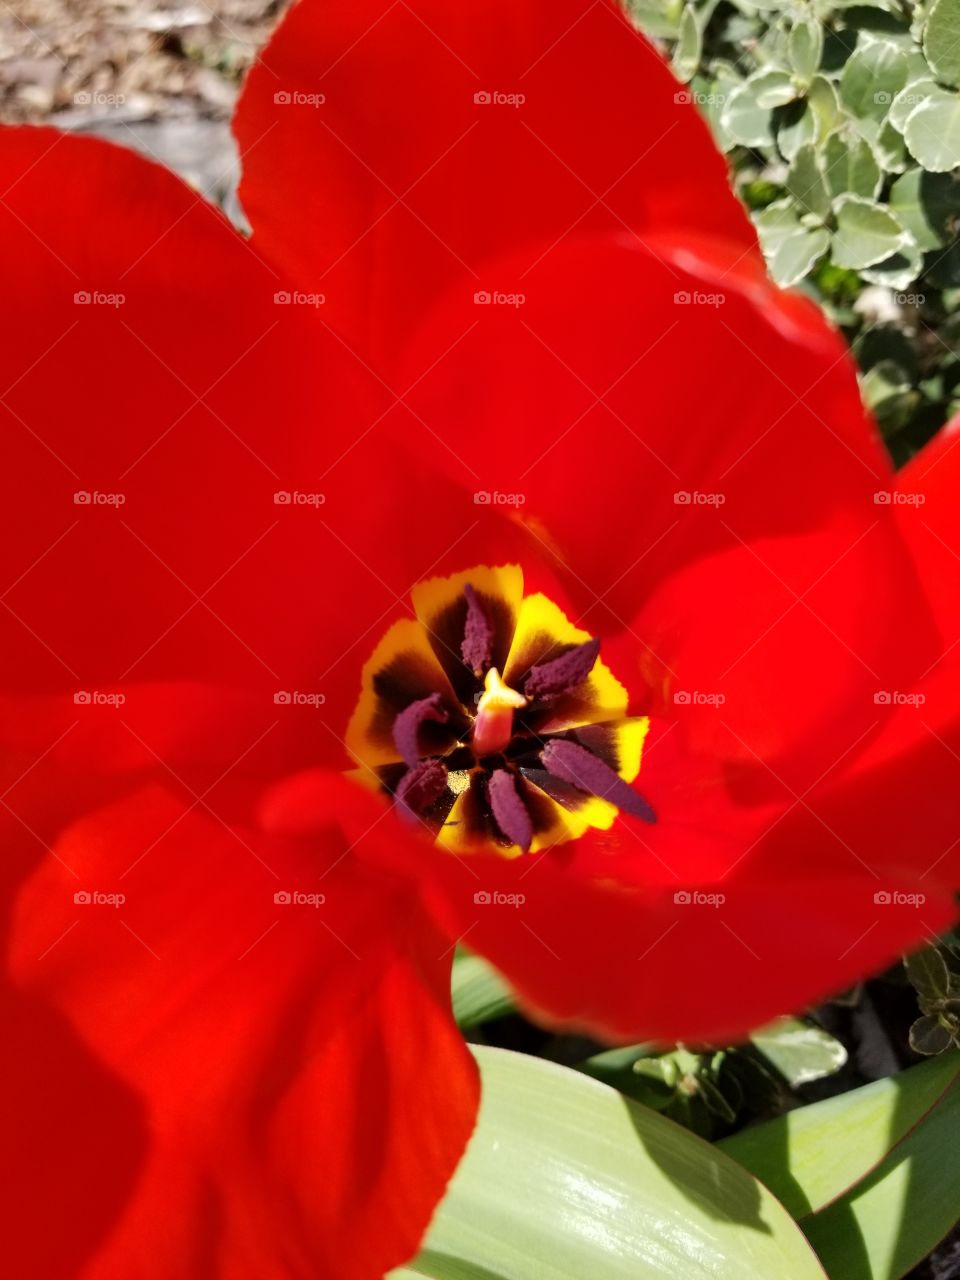 Enjoy the red tulips that always shine bright during spring.